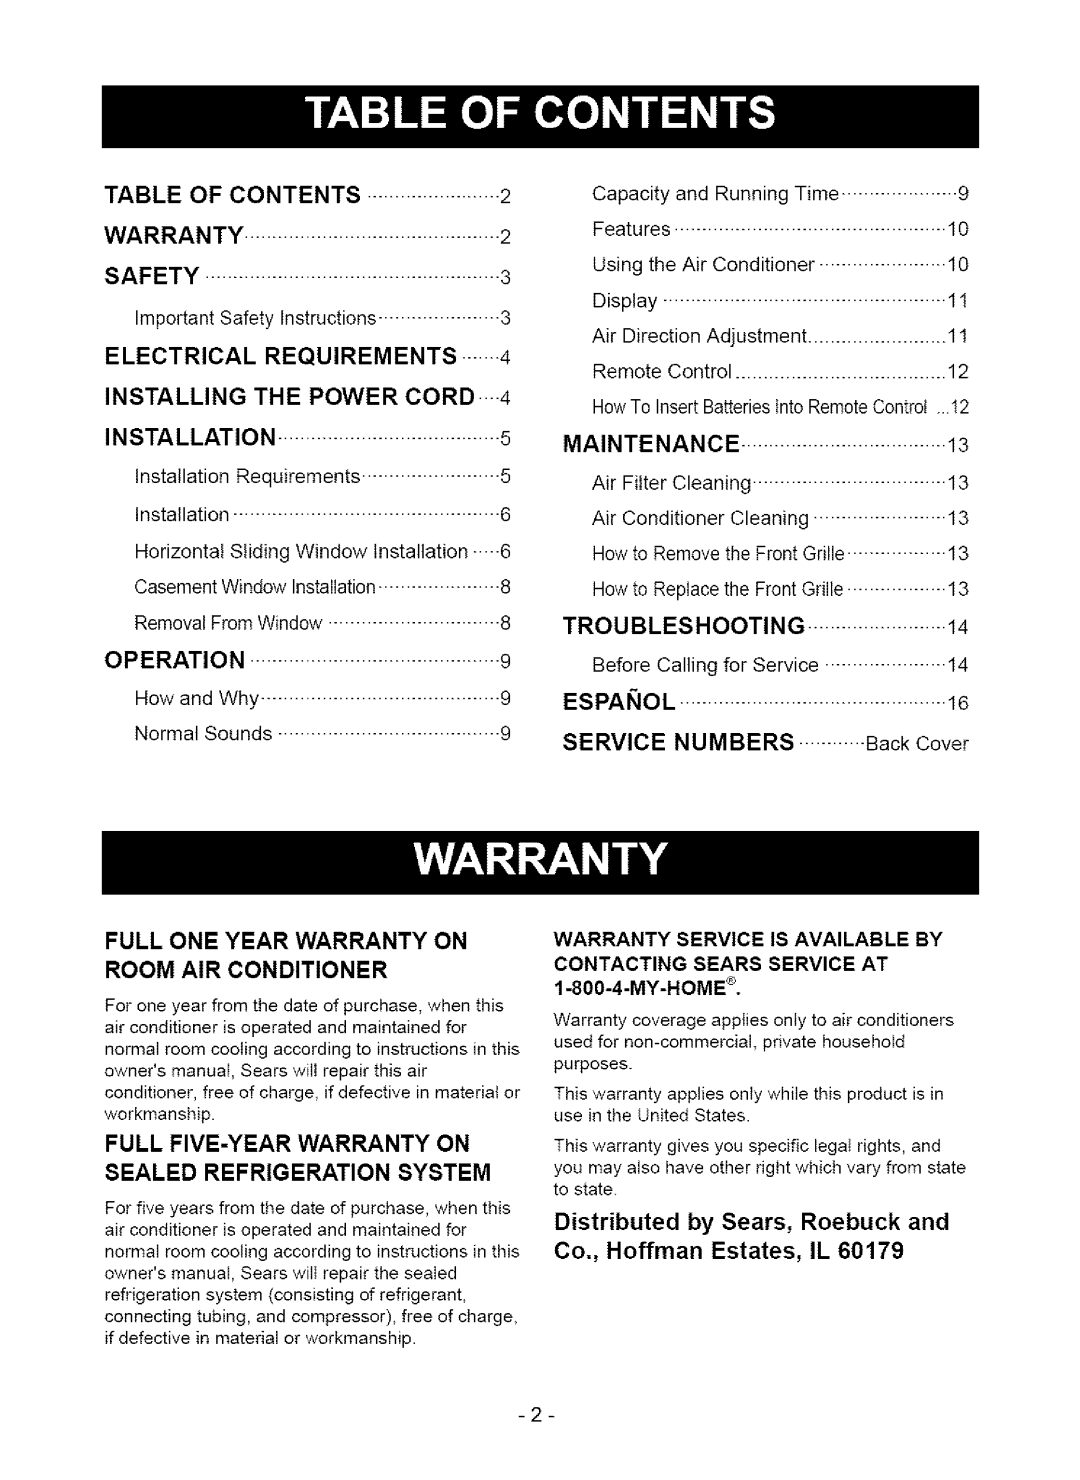 Kenmore 580. 75063, 580.75123 owner manual Full One Year Warranty On Room Air Conditioner, Distributed by Sears, Roebuck and 